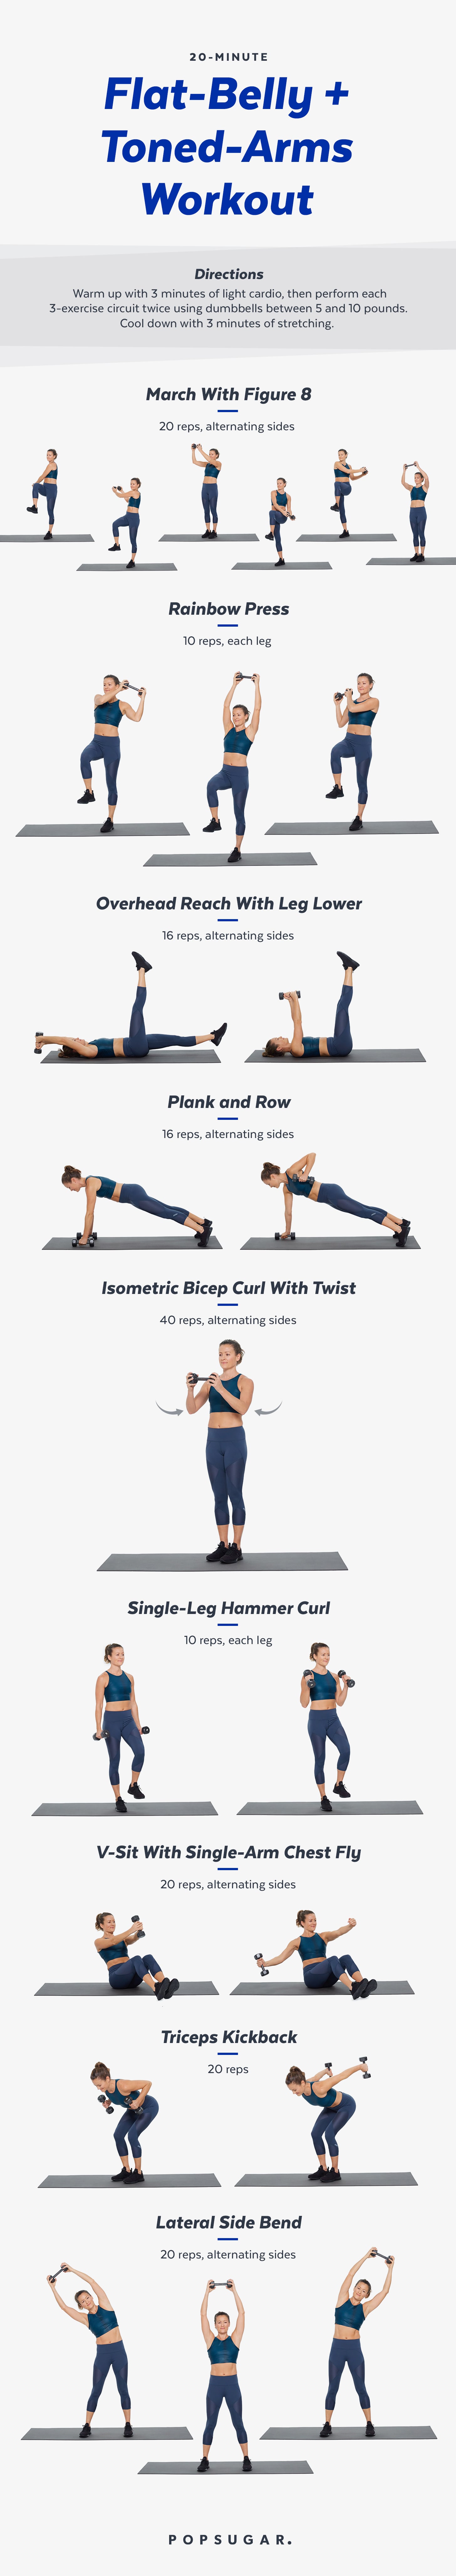 20 Minute Flat Abs Toned Arms Workout Popsugar Fitness